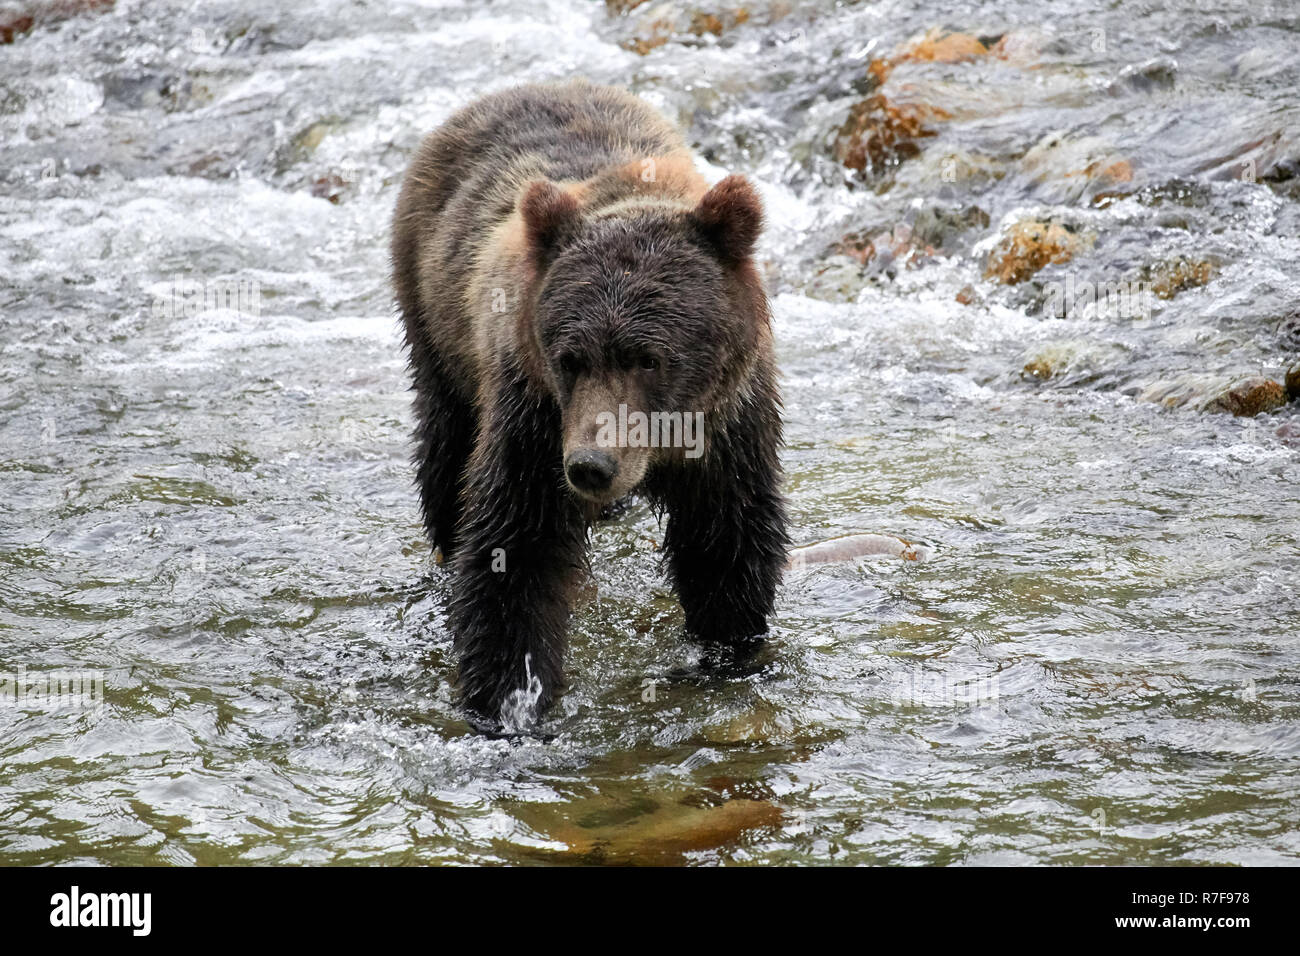 Grizzly bear searching for salmon, Great Bear Rainforest, Canada Stock Photo